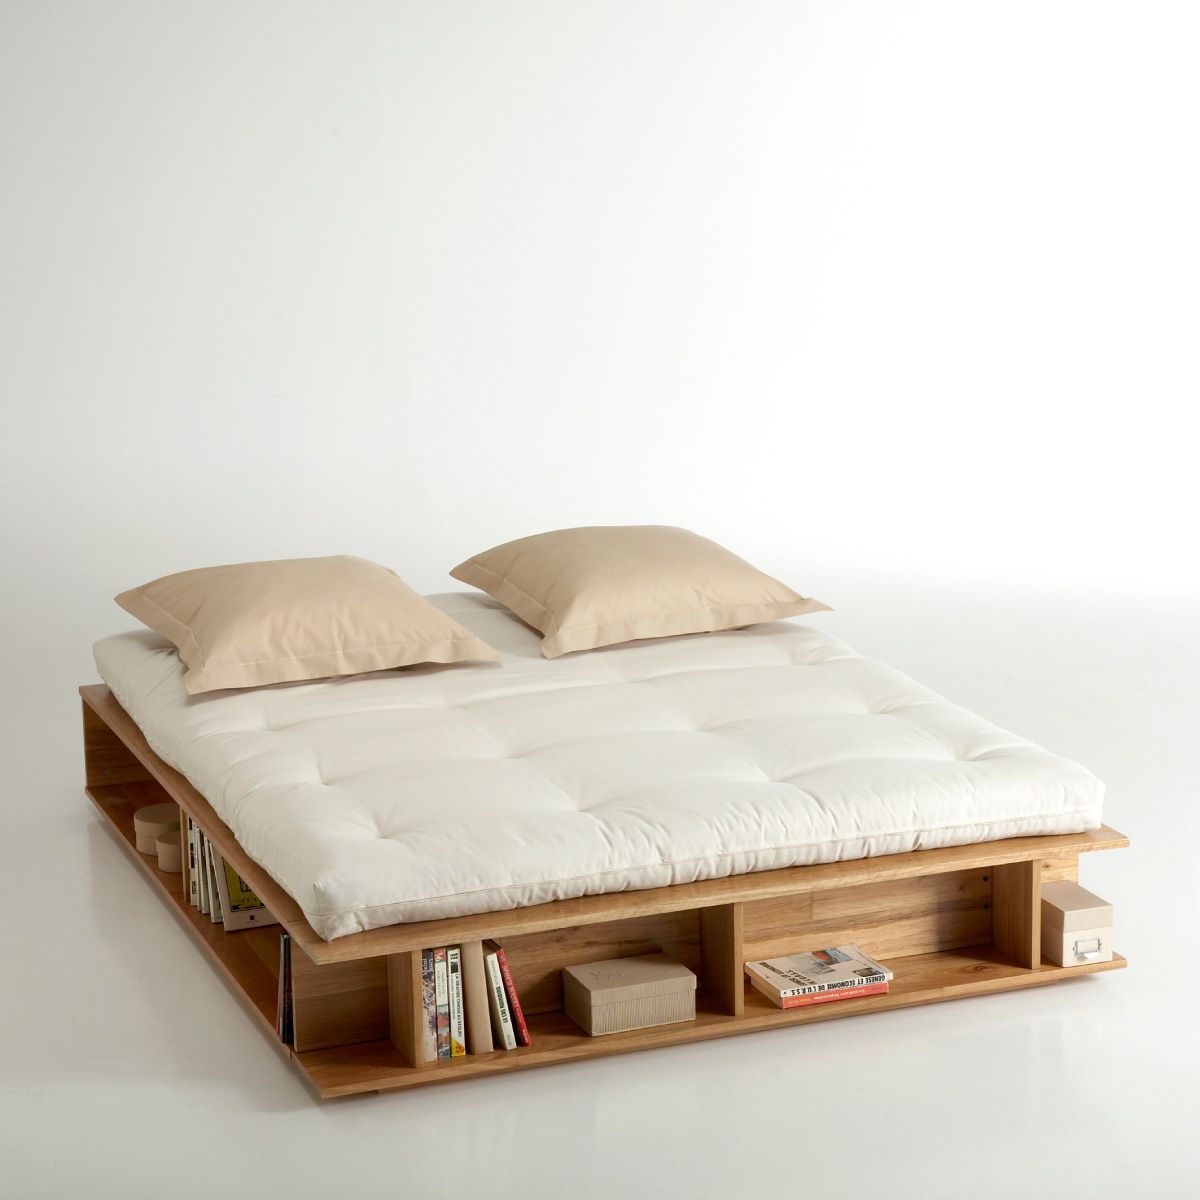 Futon Bed Designs: Maximize Space with Stylish and Functional Futon Bed Designs